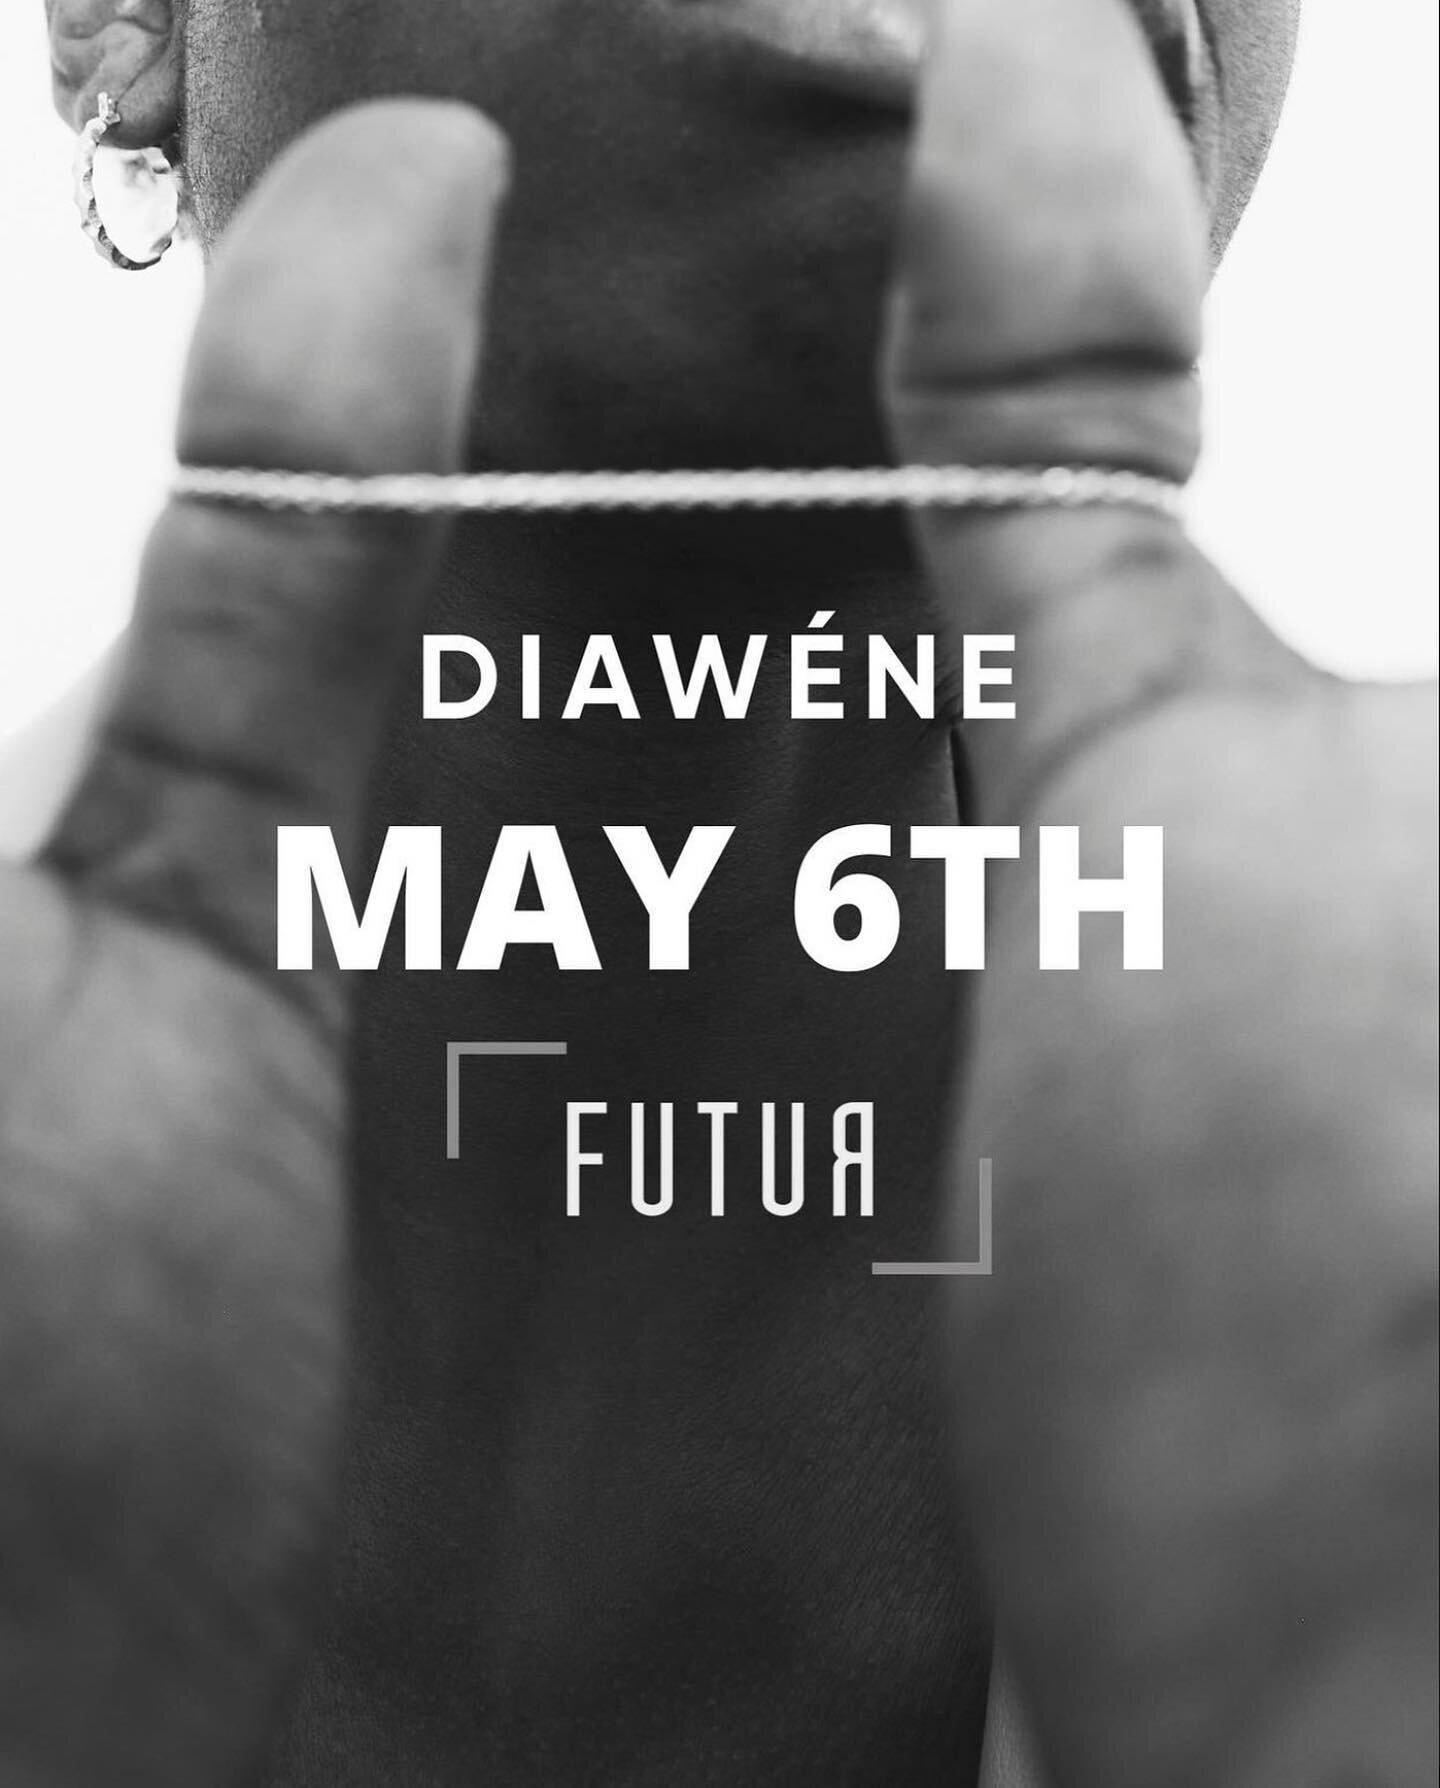 The moment we have been waiting for!

TODAY, our favorite jewelry brand @diawene_official is launching in store for the first time ever!

You can find them @futurstore at Grunerl&oslash;kka in Oslo city.

Congratulations 🤍

@amiekmbye @emmasukalic